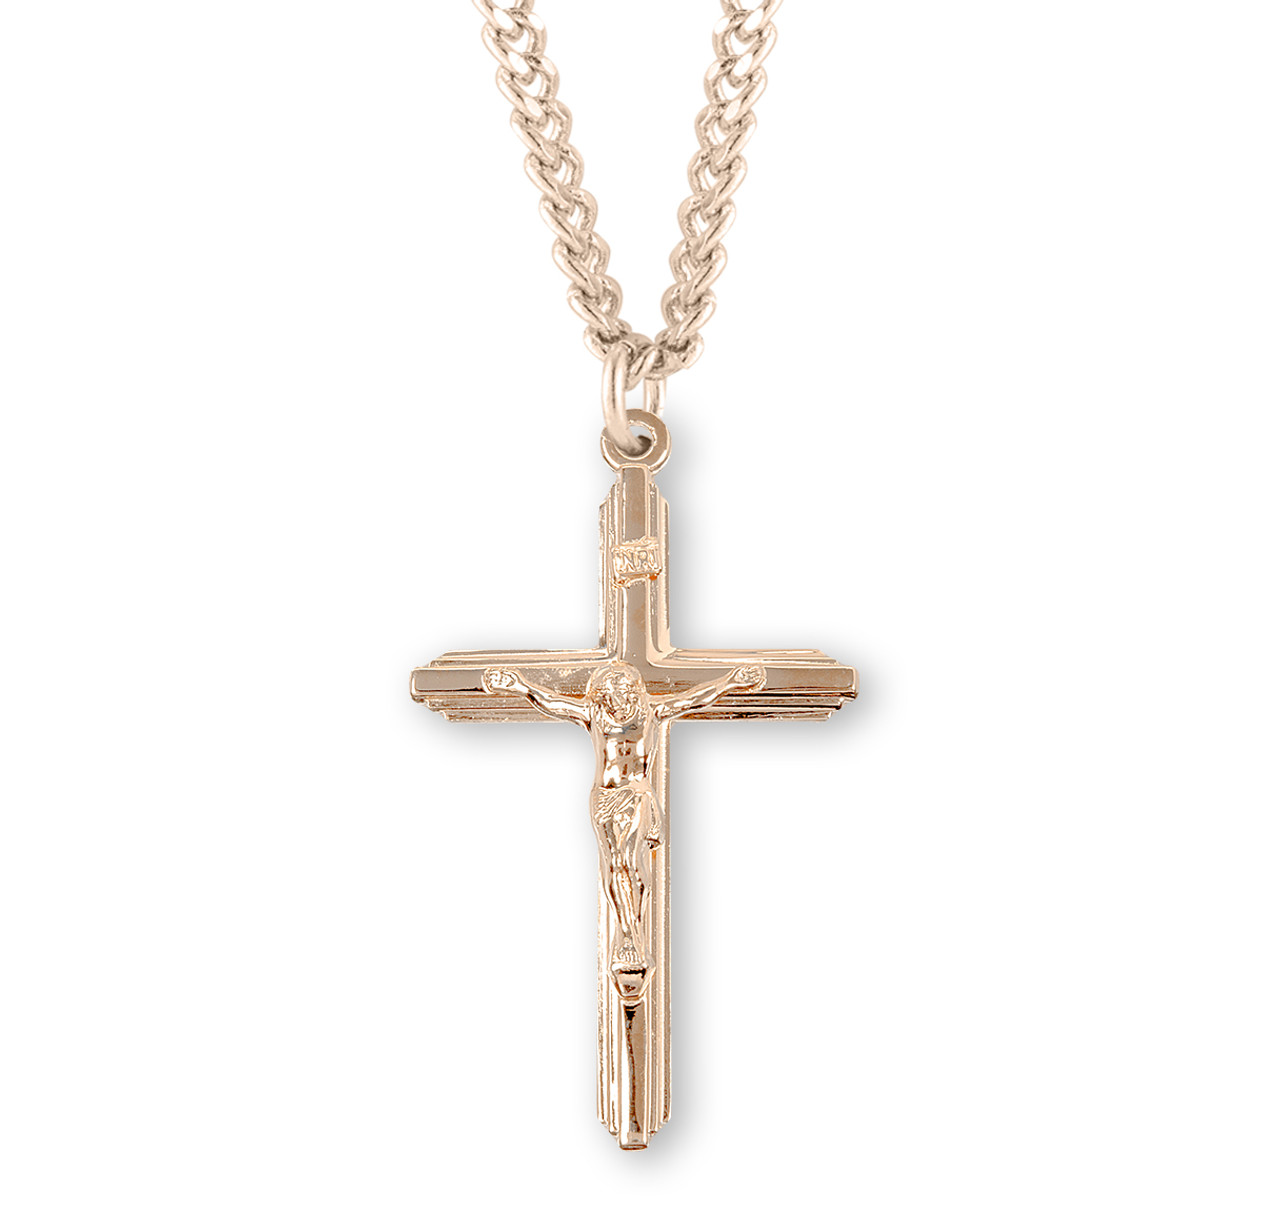 Mens Gold Cross Necklace, 18K Gold Crucifix Pendant Men 925 Sterling Silver  Necklace, Cross Necklace Men, Gold Chain Man by Twistedpendant 